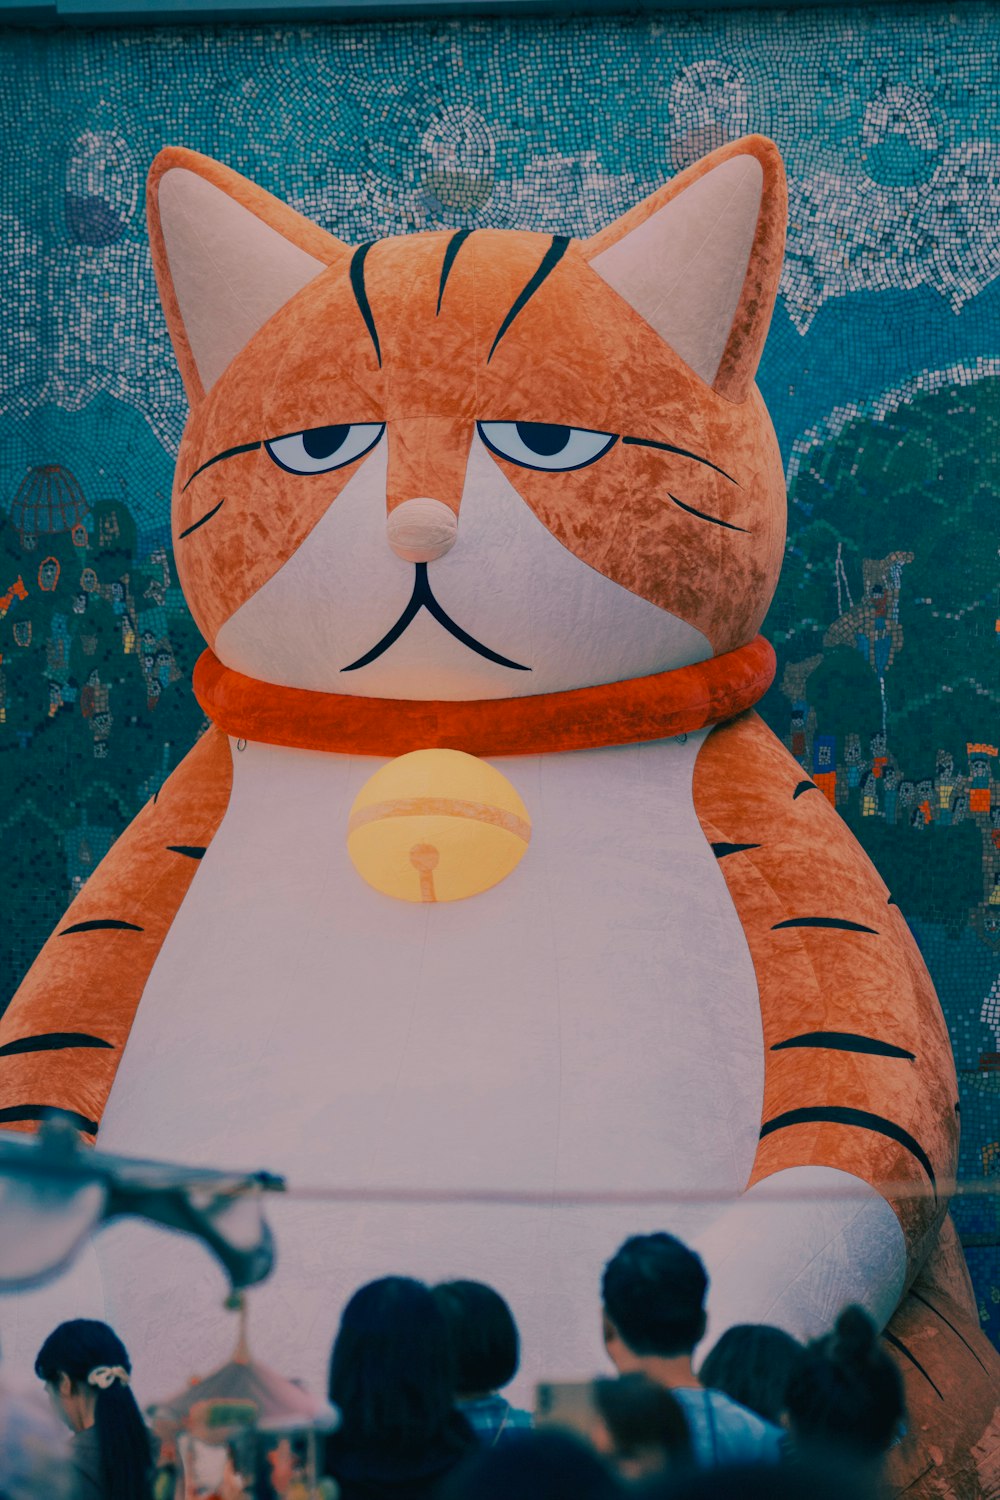 a large stuffed cat sitting in front of a crowd of people